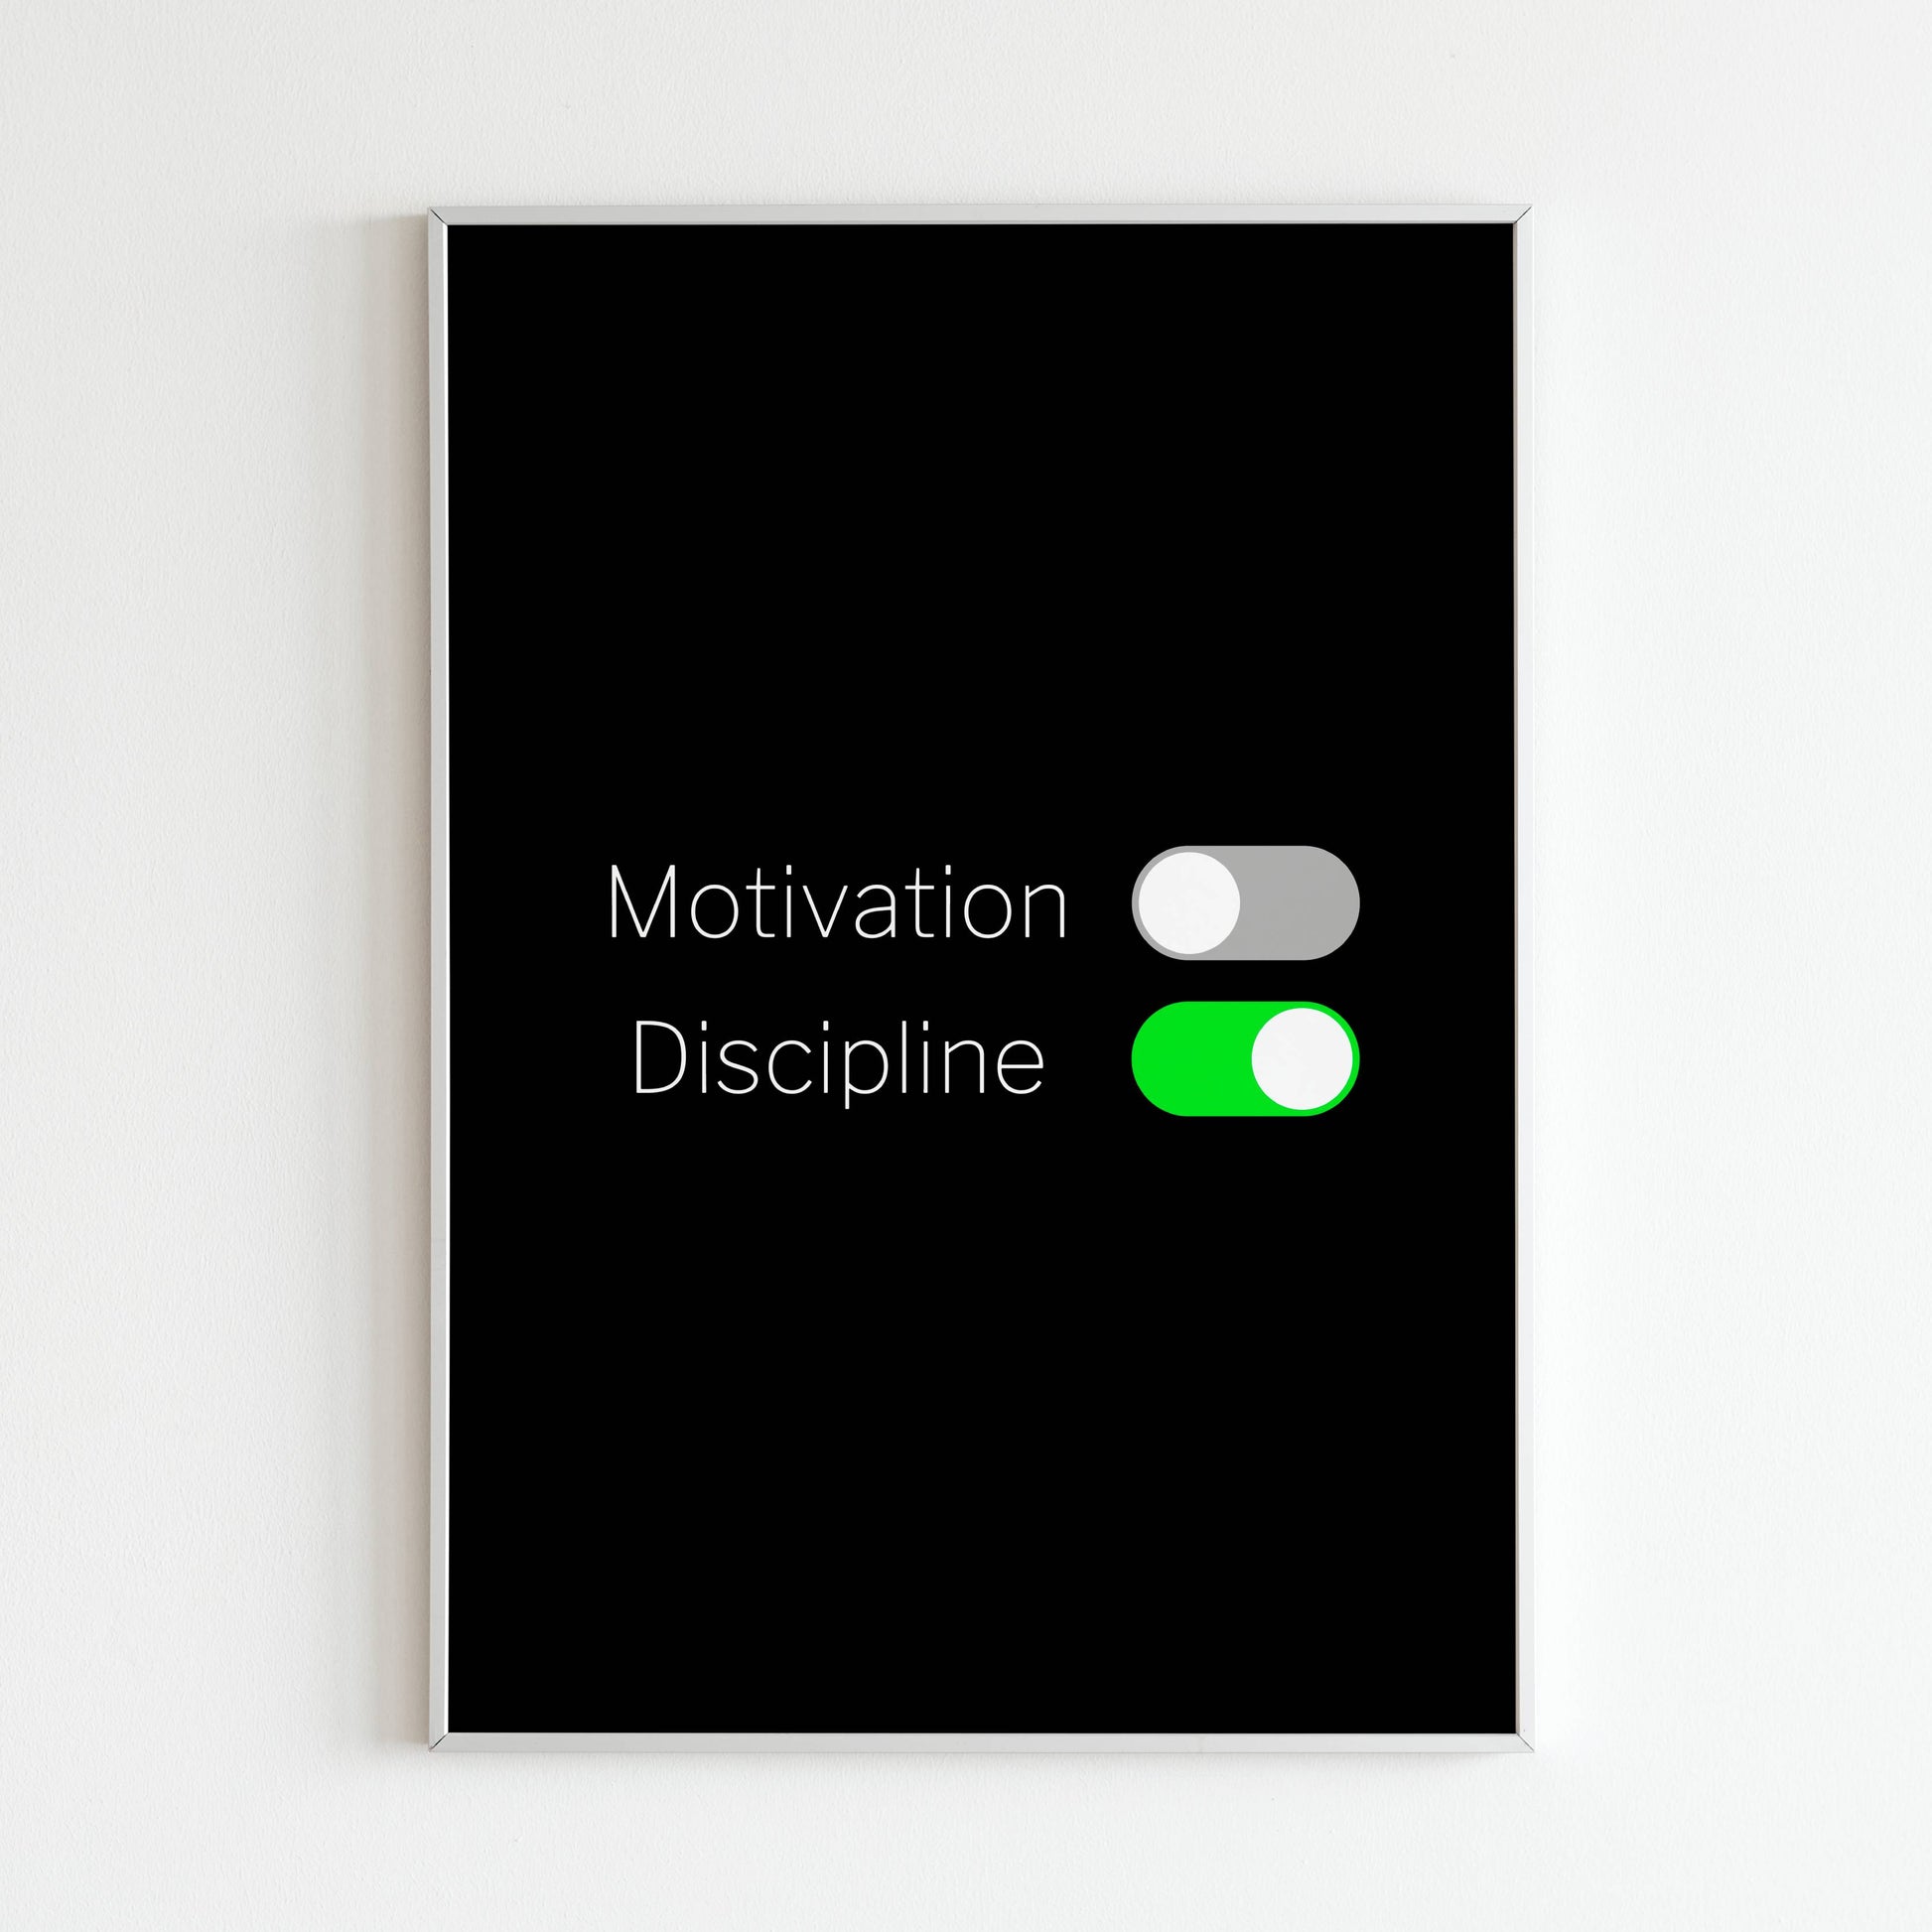 Downloadable "Motivation ON, discipline OF" wall art for a reminder of the importance of both.